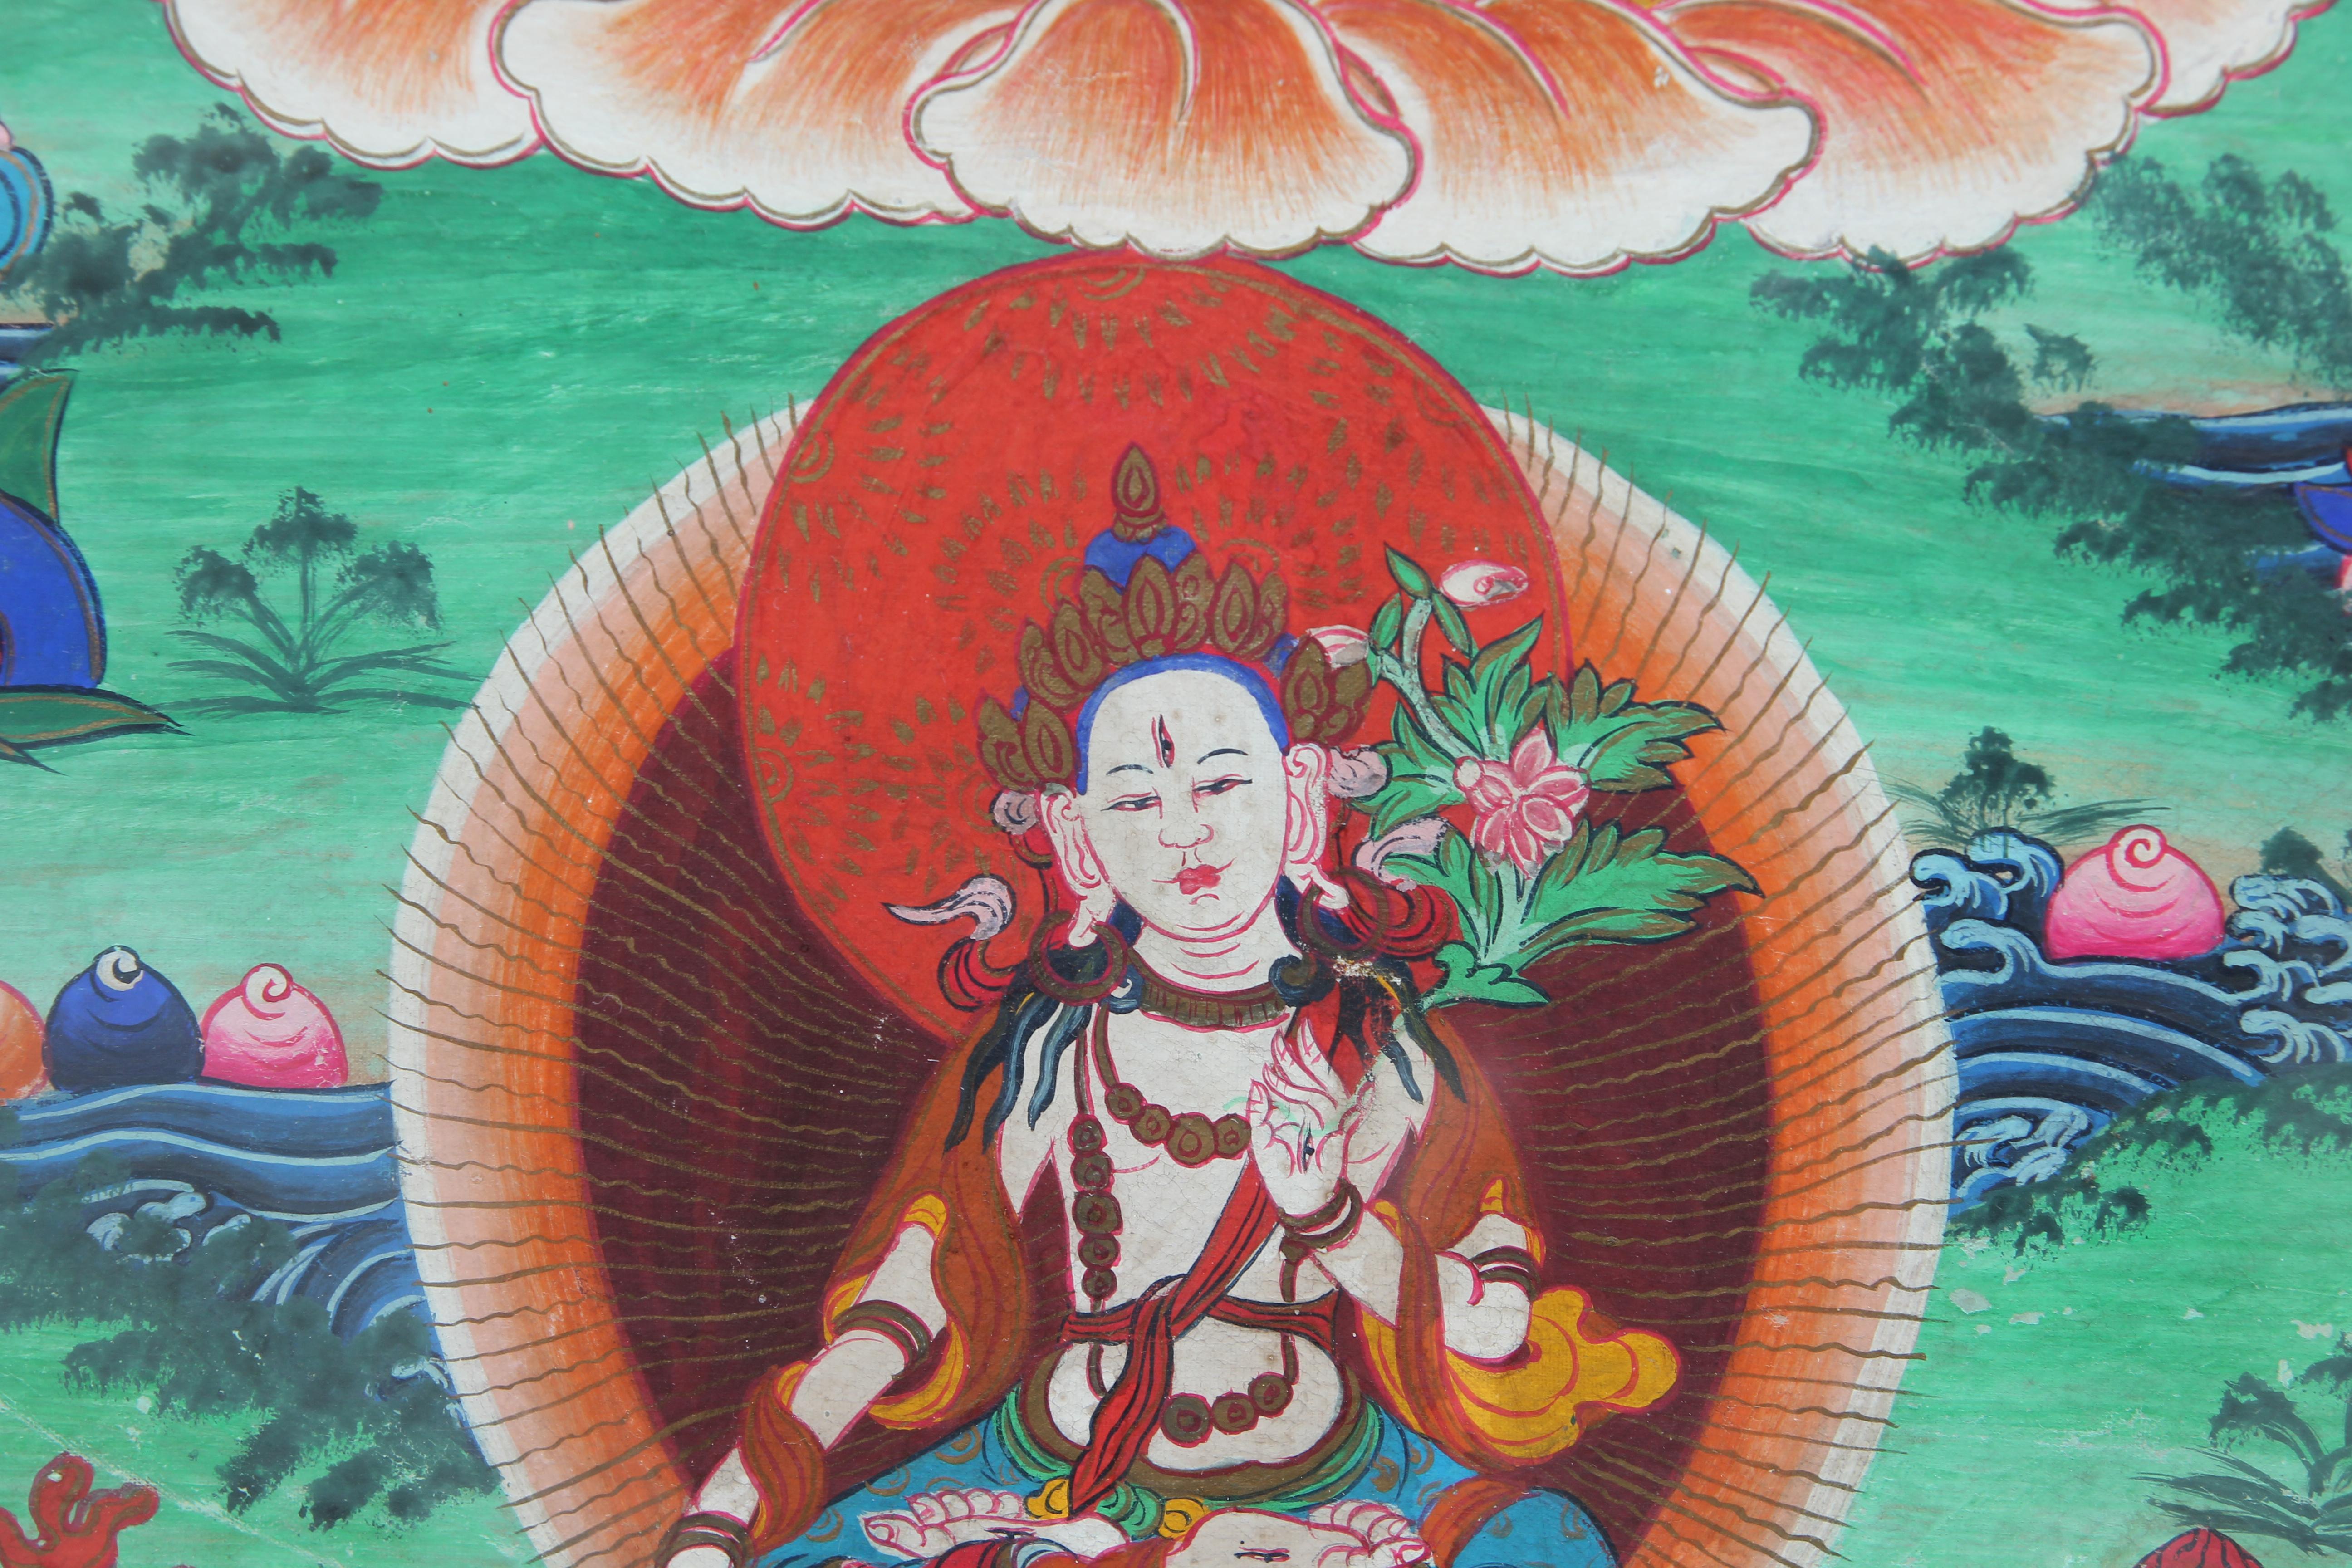 Thangkas are devotional paintings used in by Buddhists in their homes, in monasteries, or temples. The main body, Lokeshwor, is white with 1000 arms and 1000 eyes and symbolizes infinite compassion. The red, green, blue, and orange pigments on the